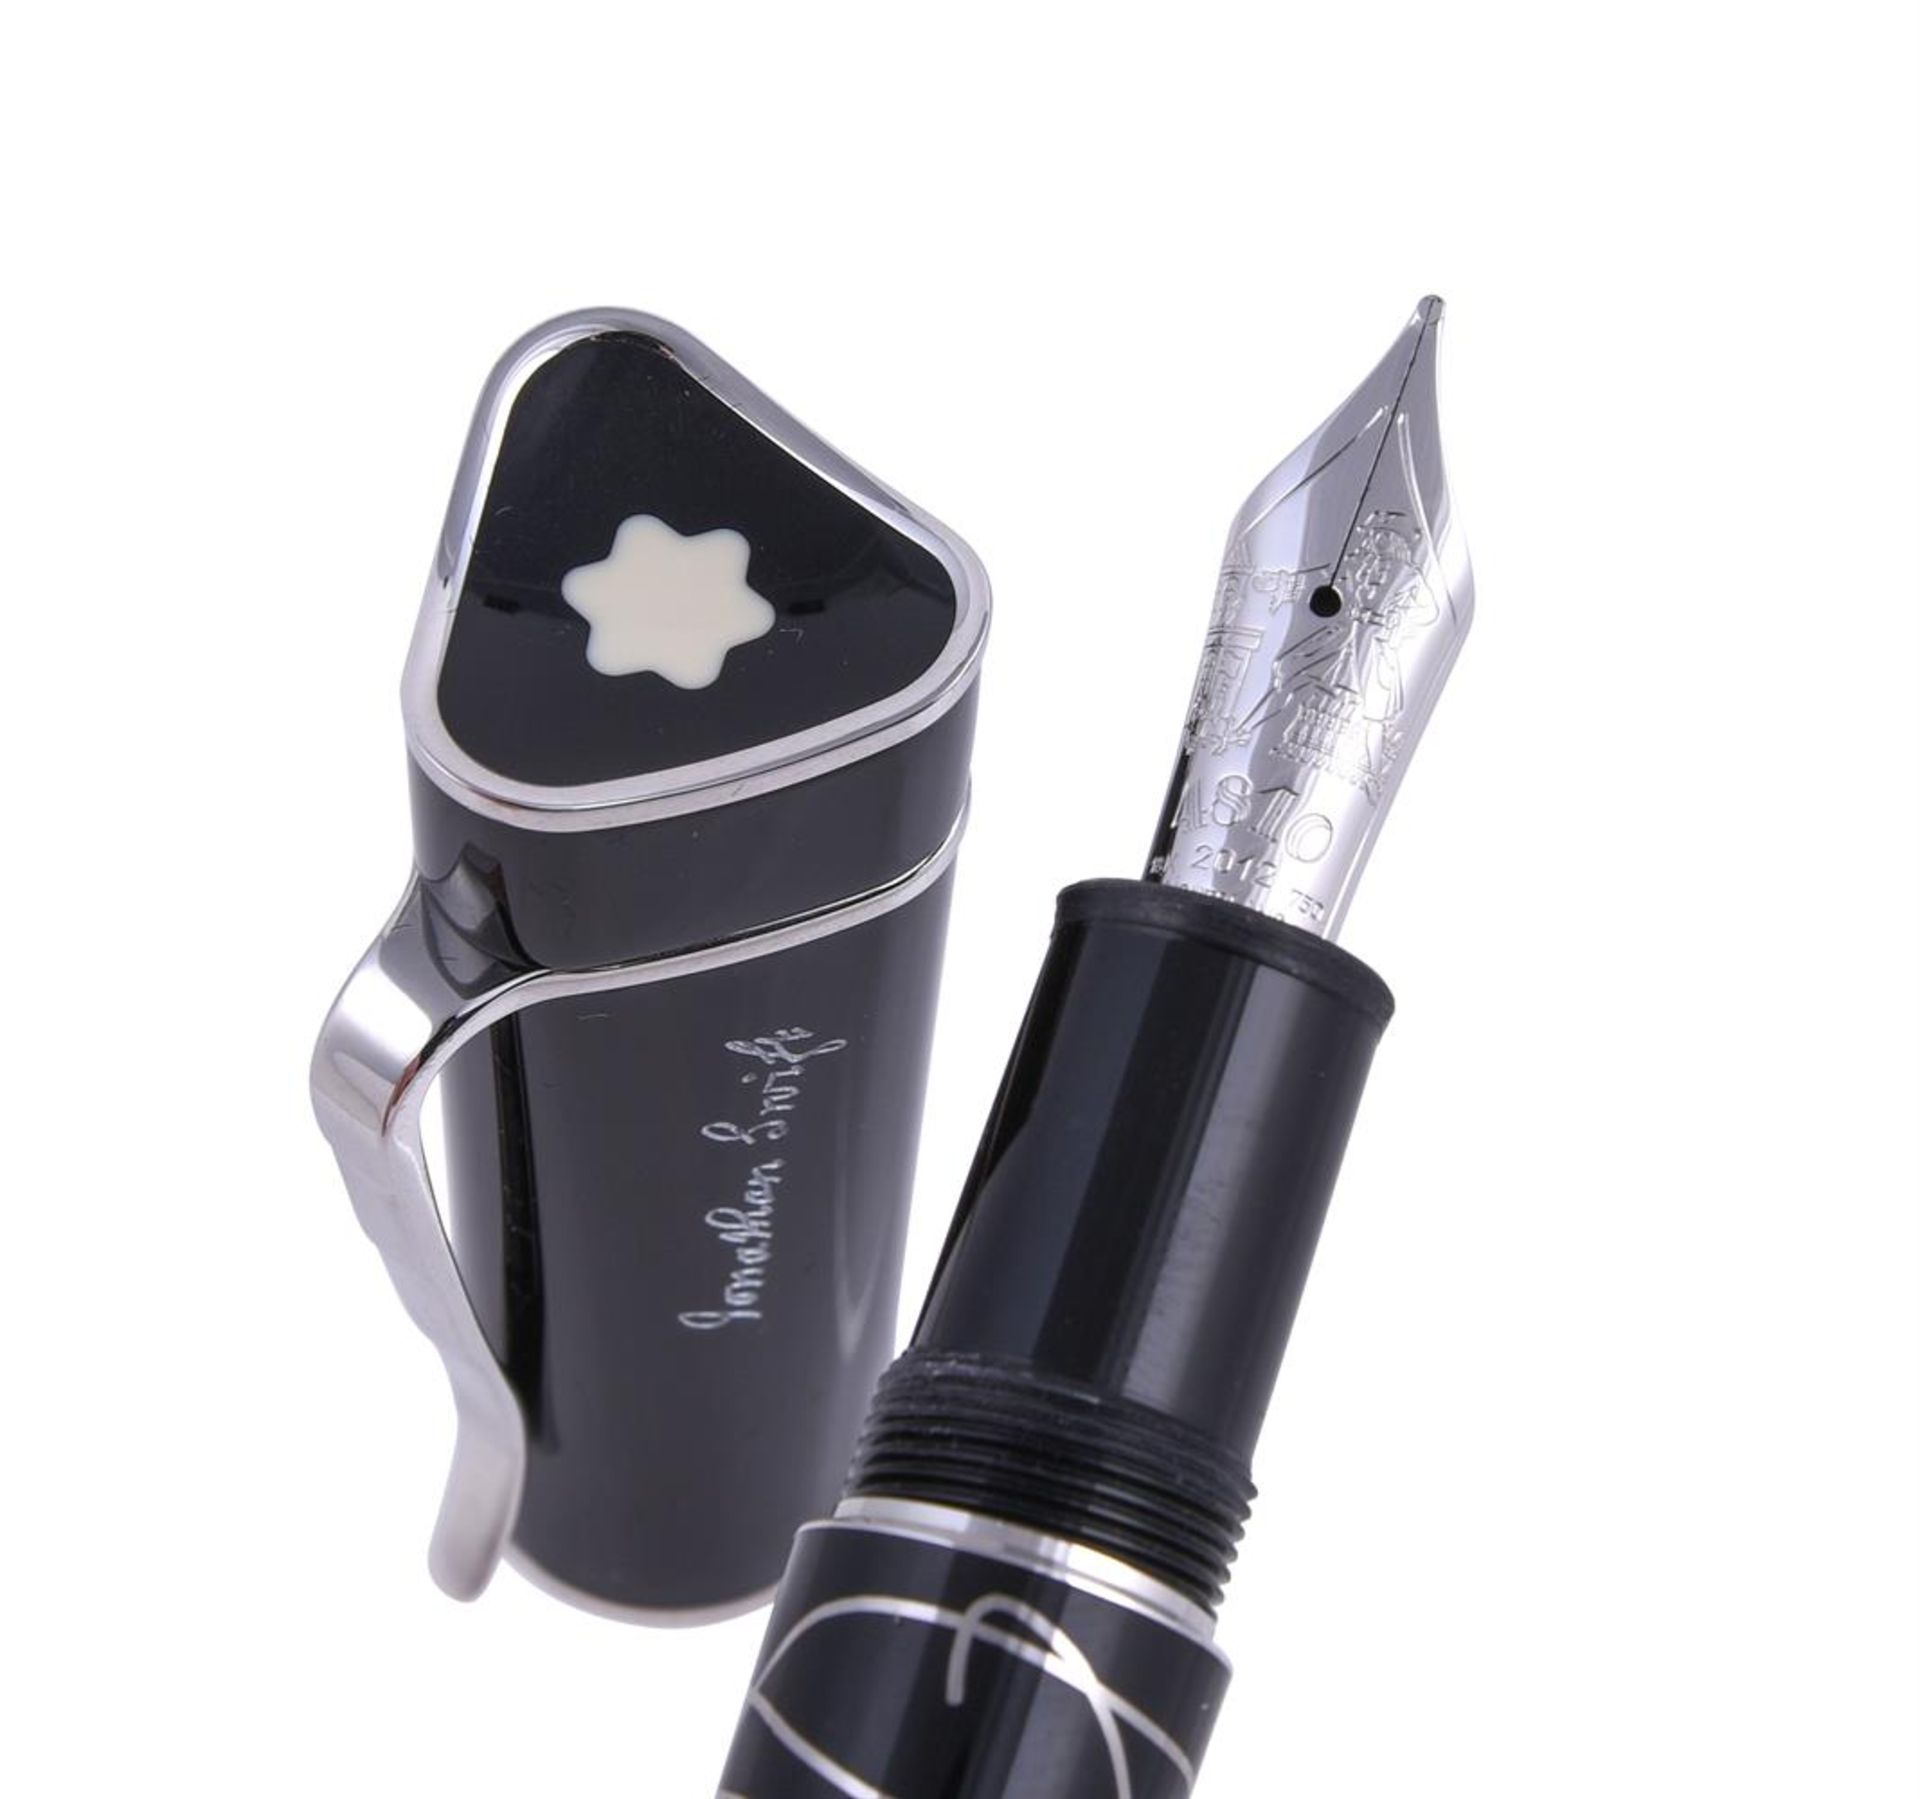 MONTBLANC, WRITERS EDITION, JONATHAN SWIFT, A LIMITED EDITION THREE PIECE SET - Image 2 of 3